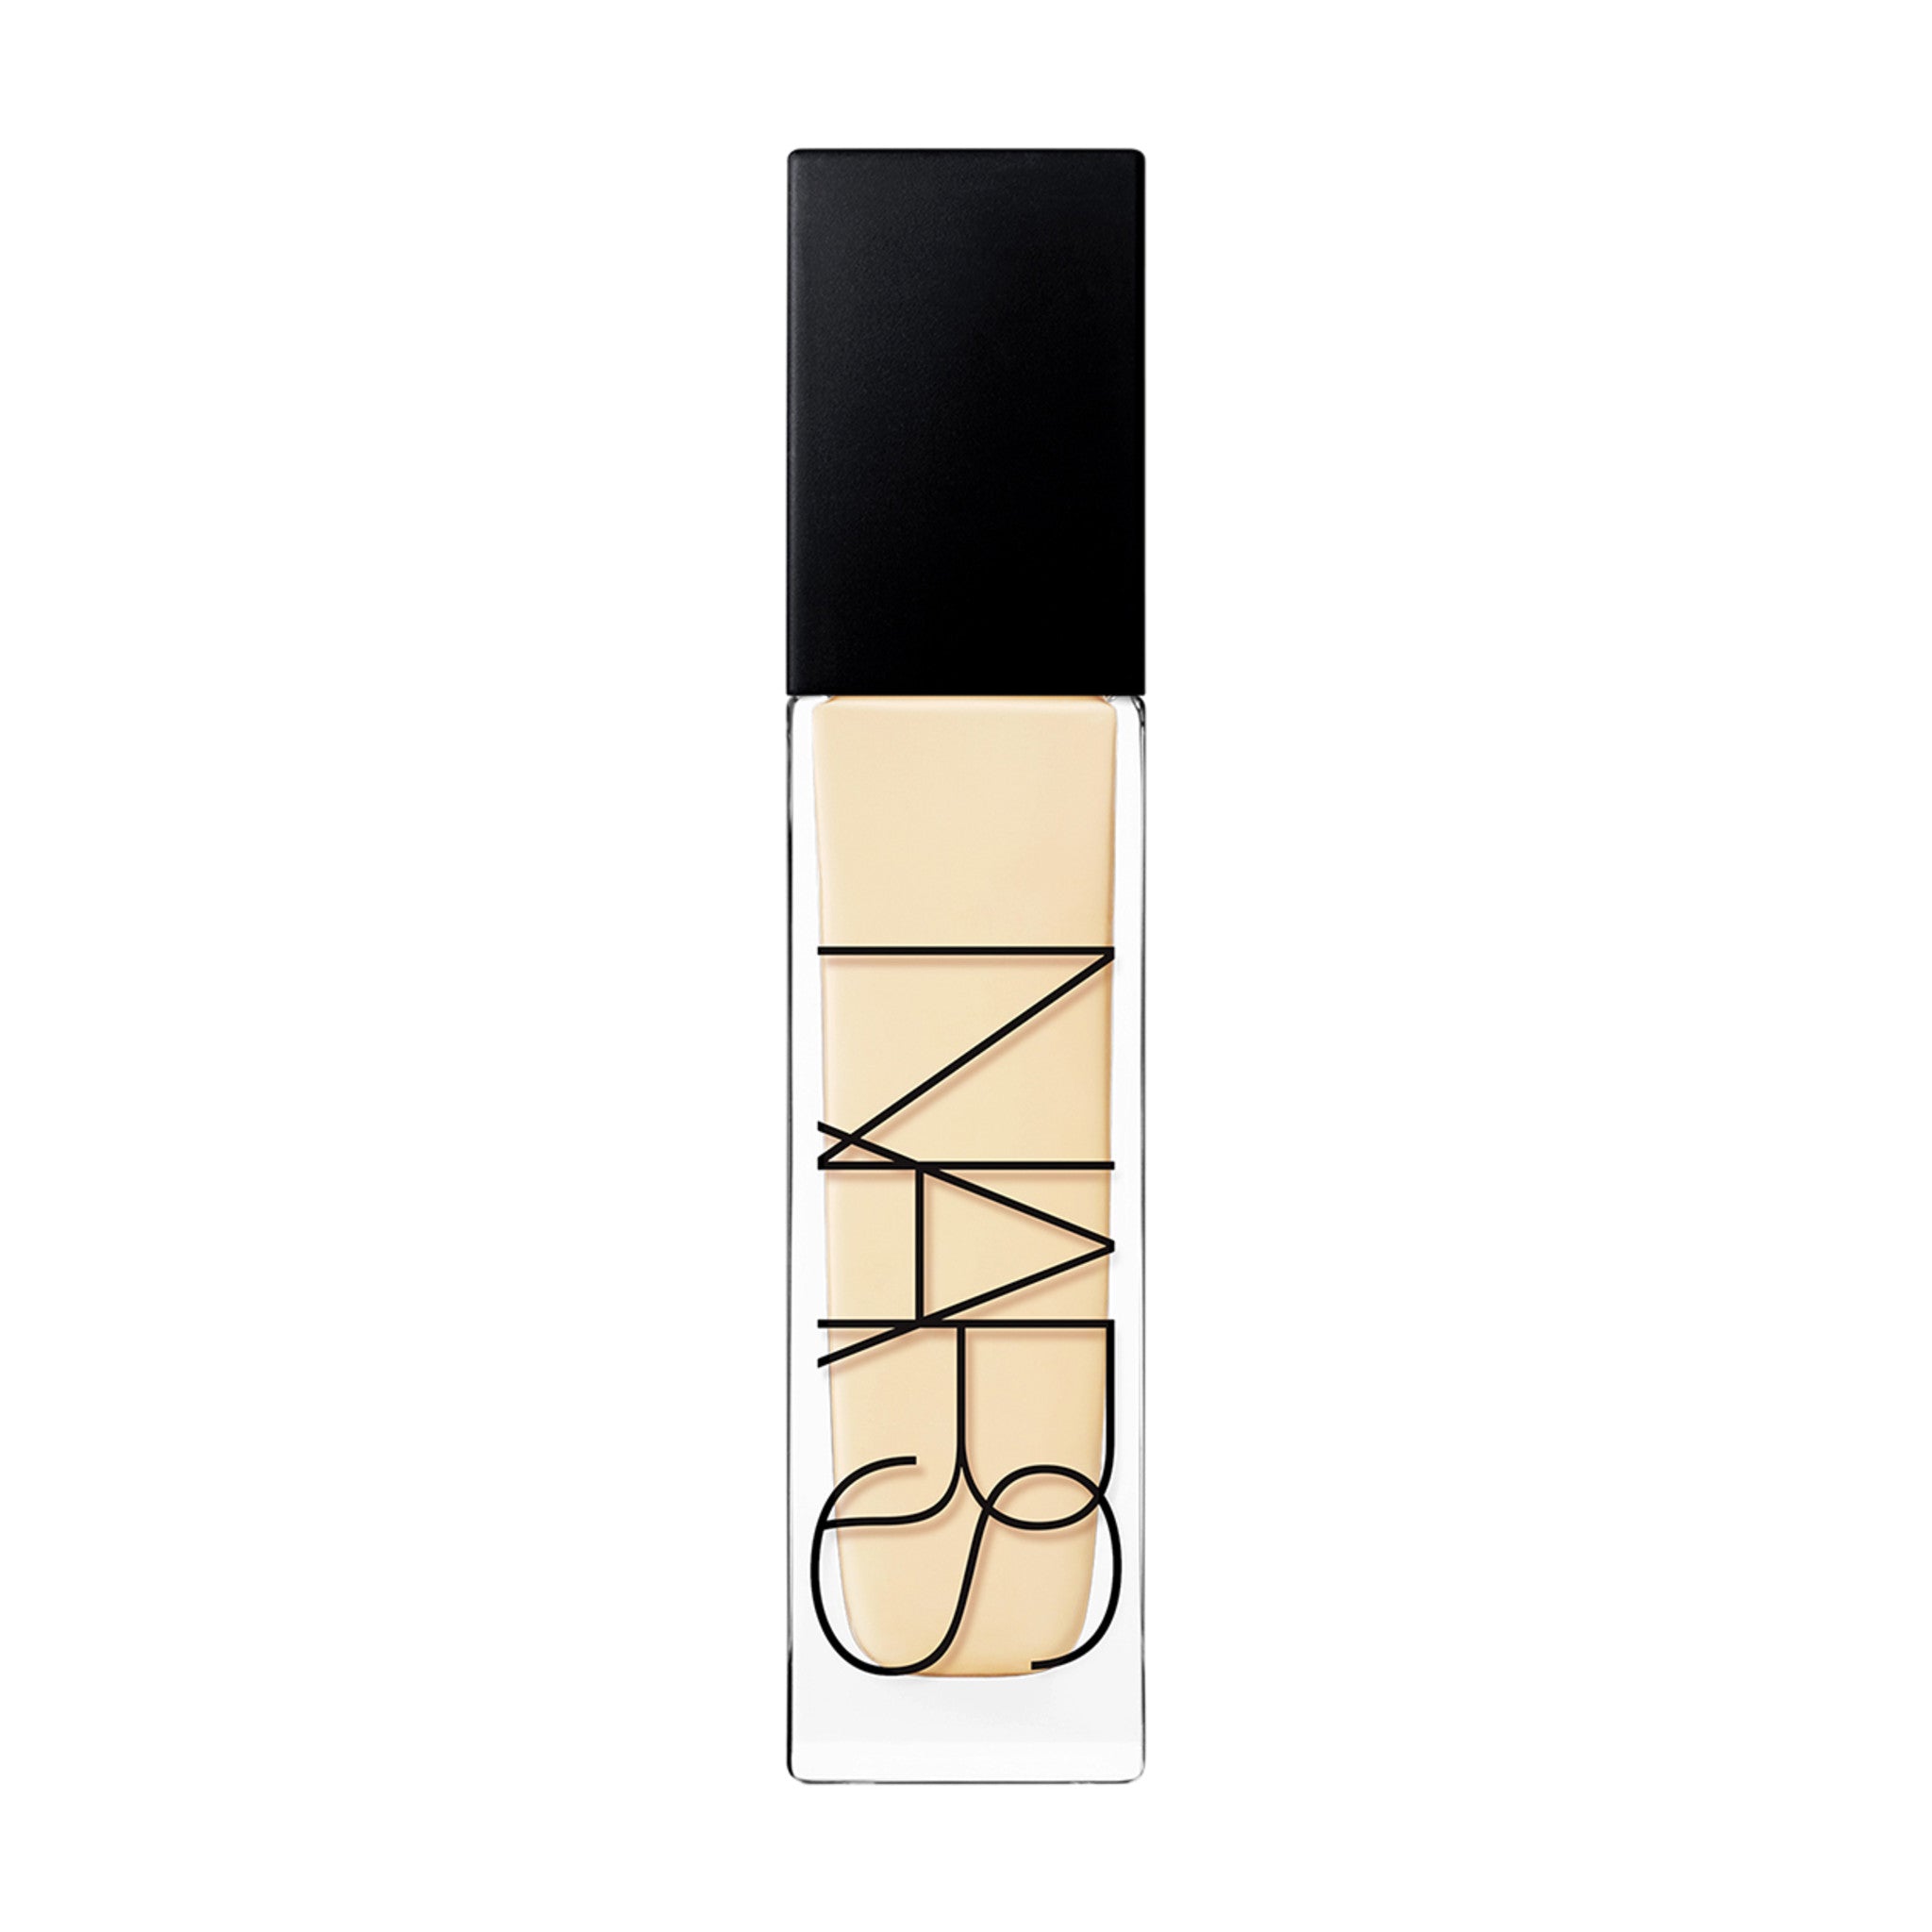 Nars Natural Radiant Longwear Foundation Color/Shade variant: Siberia L0 main image. This product is for light warm complexions